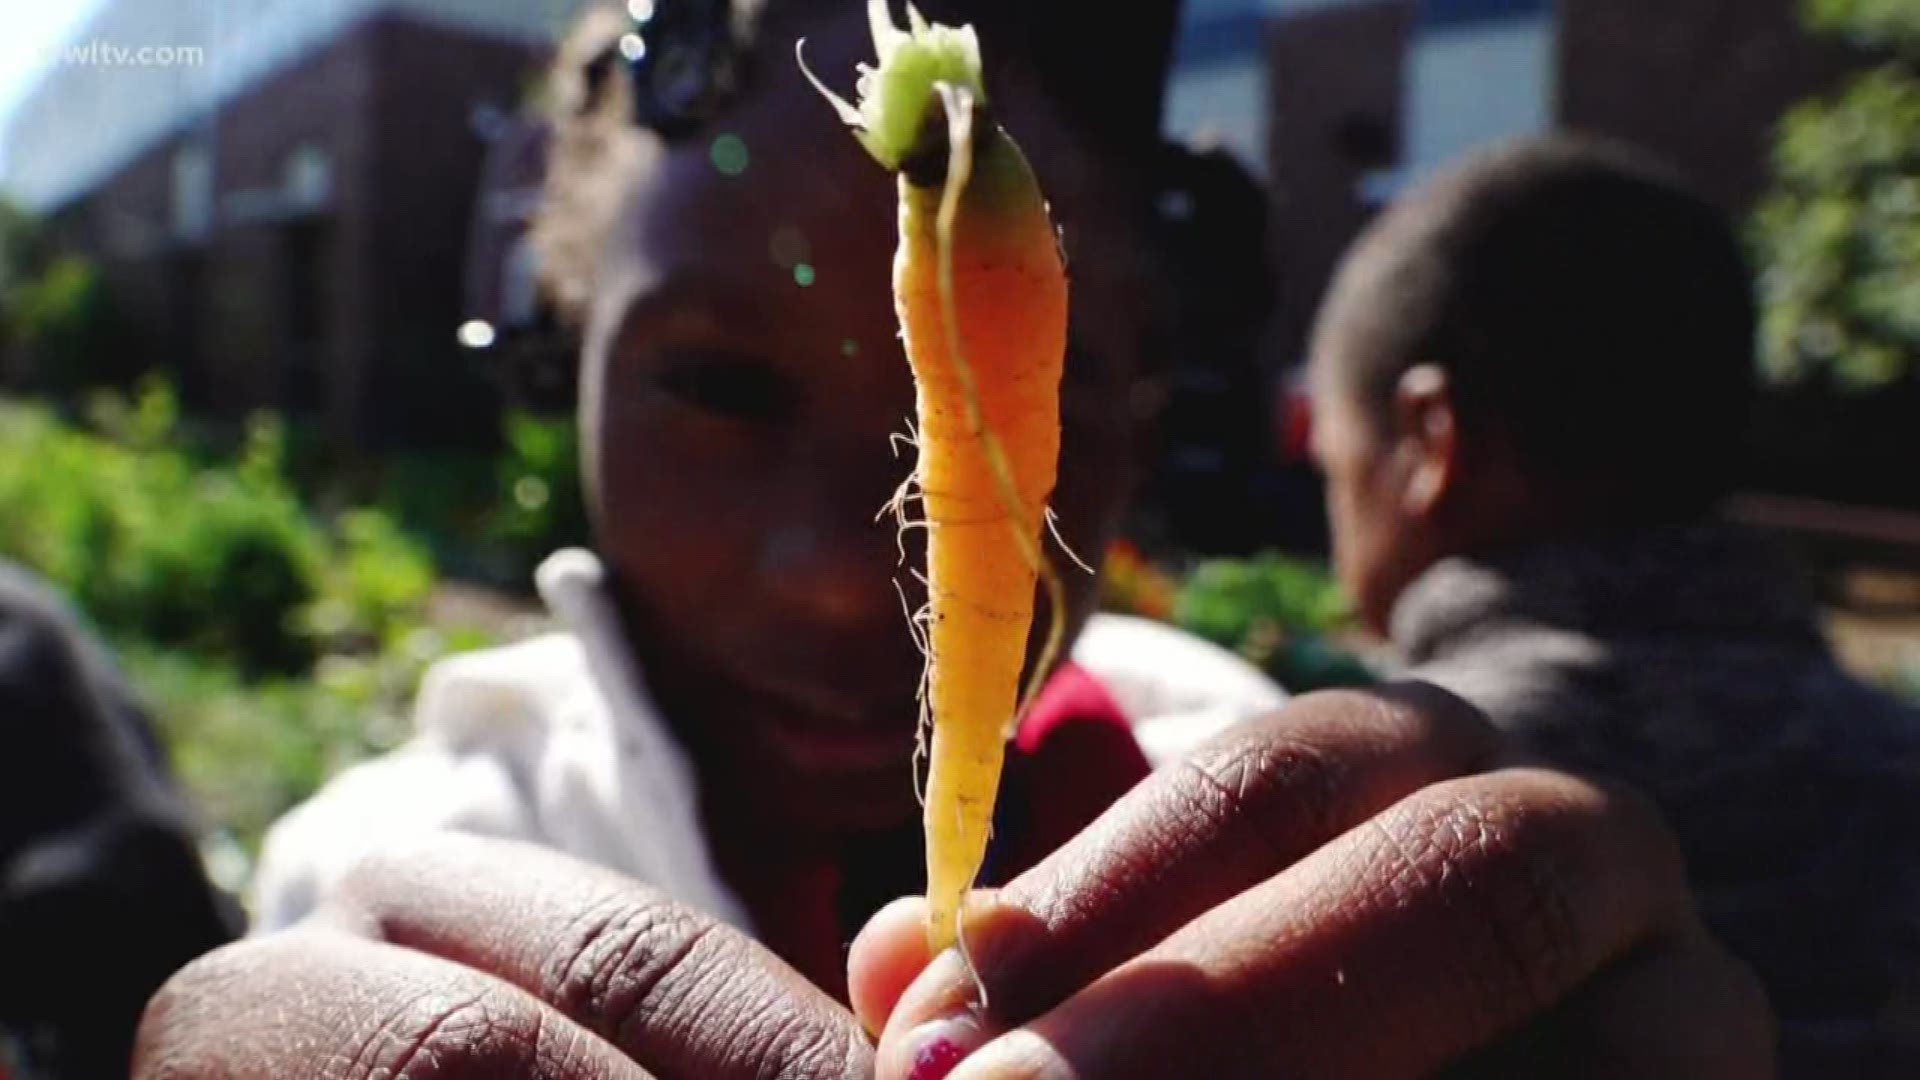 Edible Schoolyards, a signature program of First Line Schools, holds its anniversary gala this week.